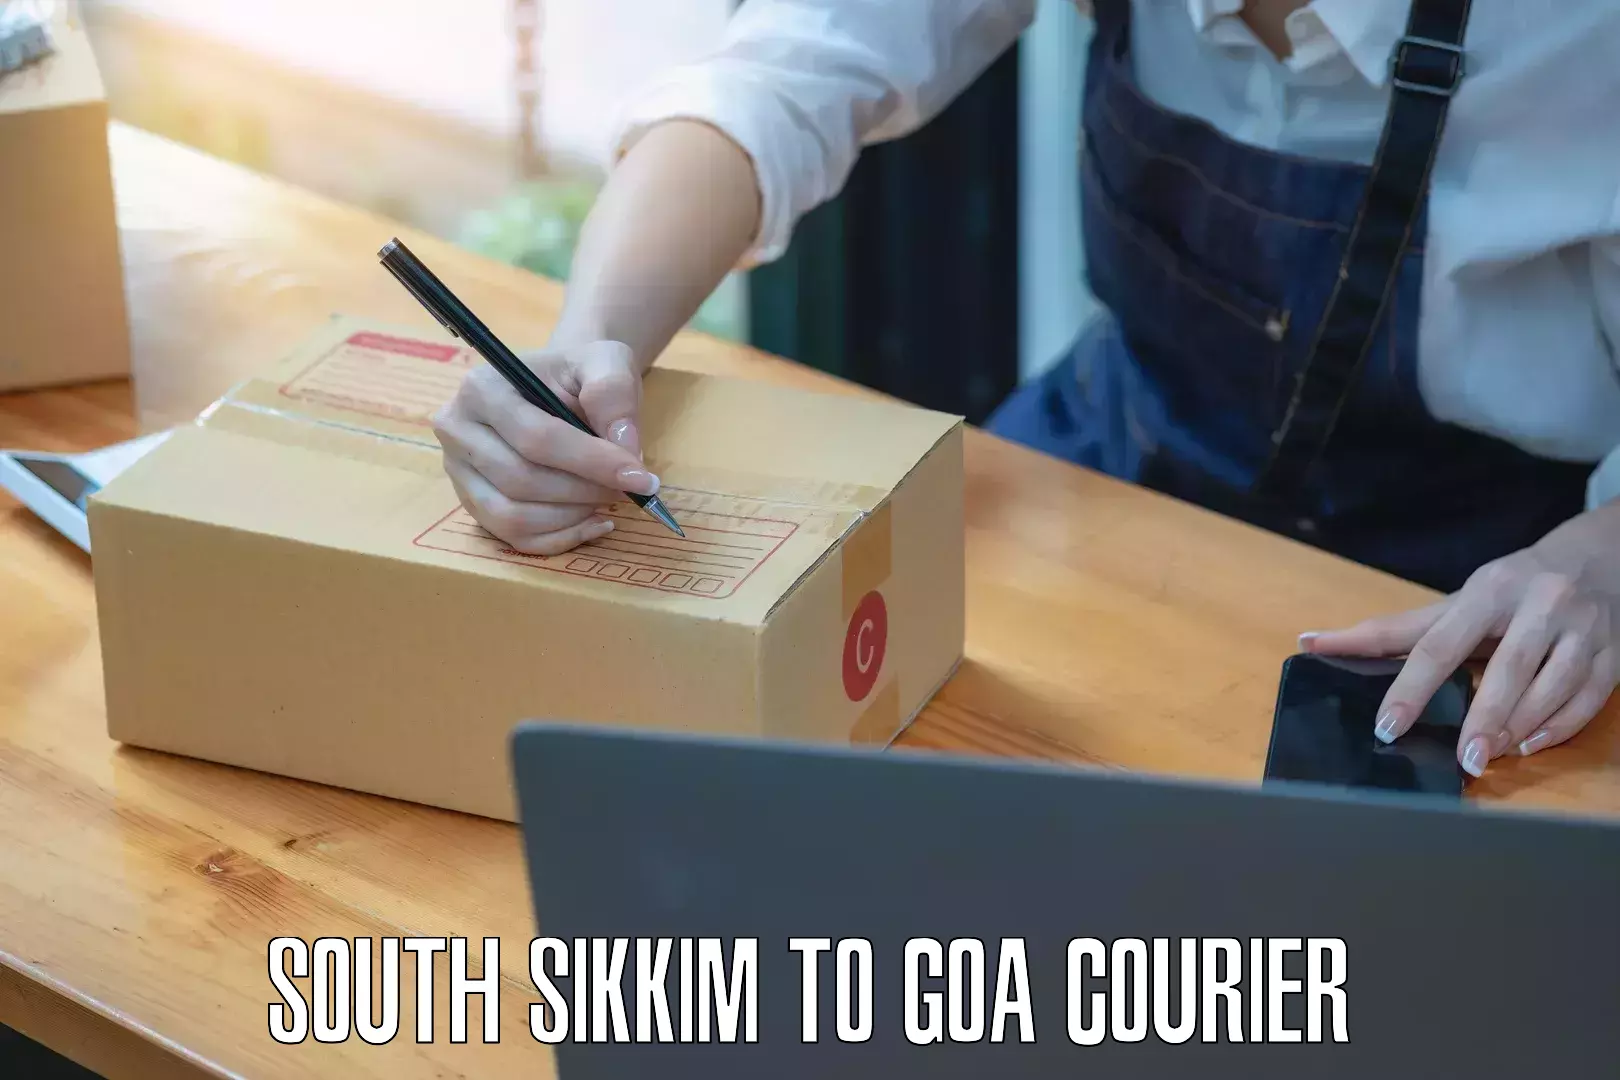 Cargo delivery service South Sikkim to South Goa